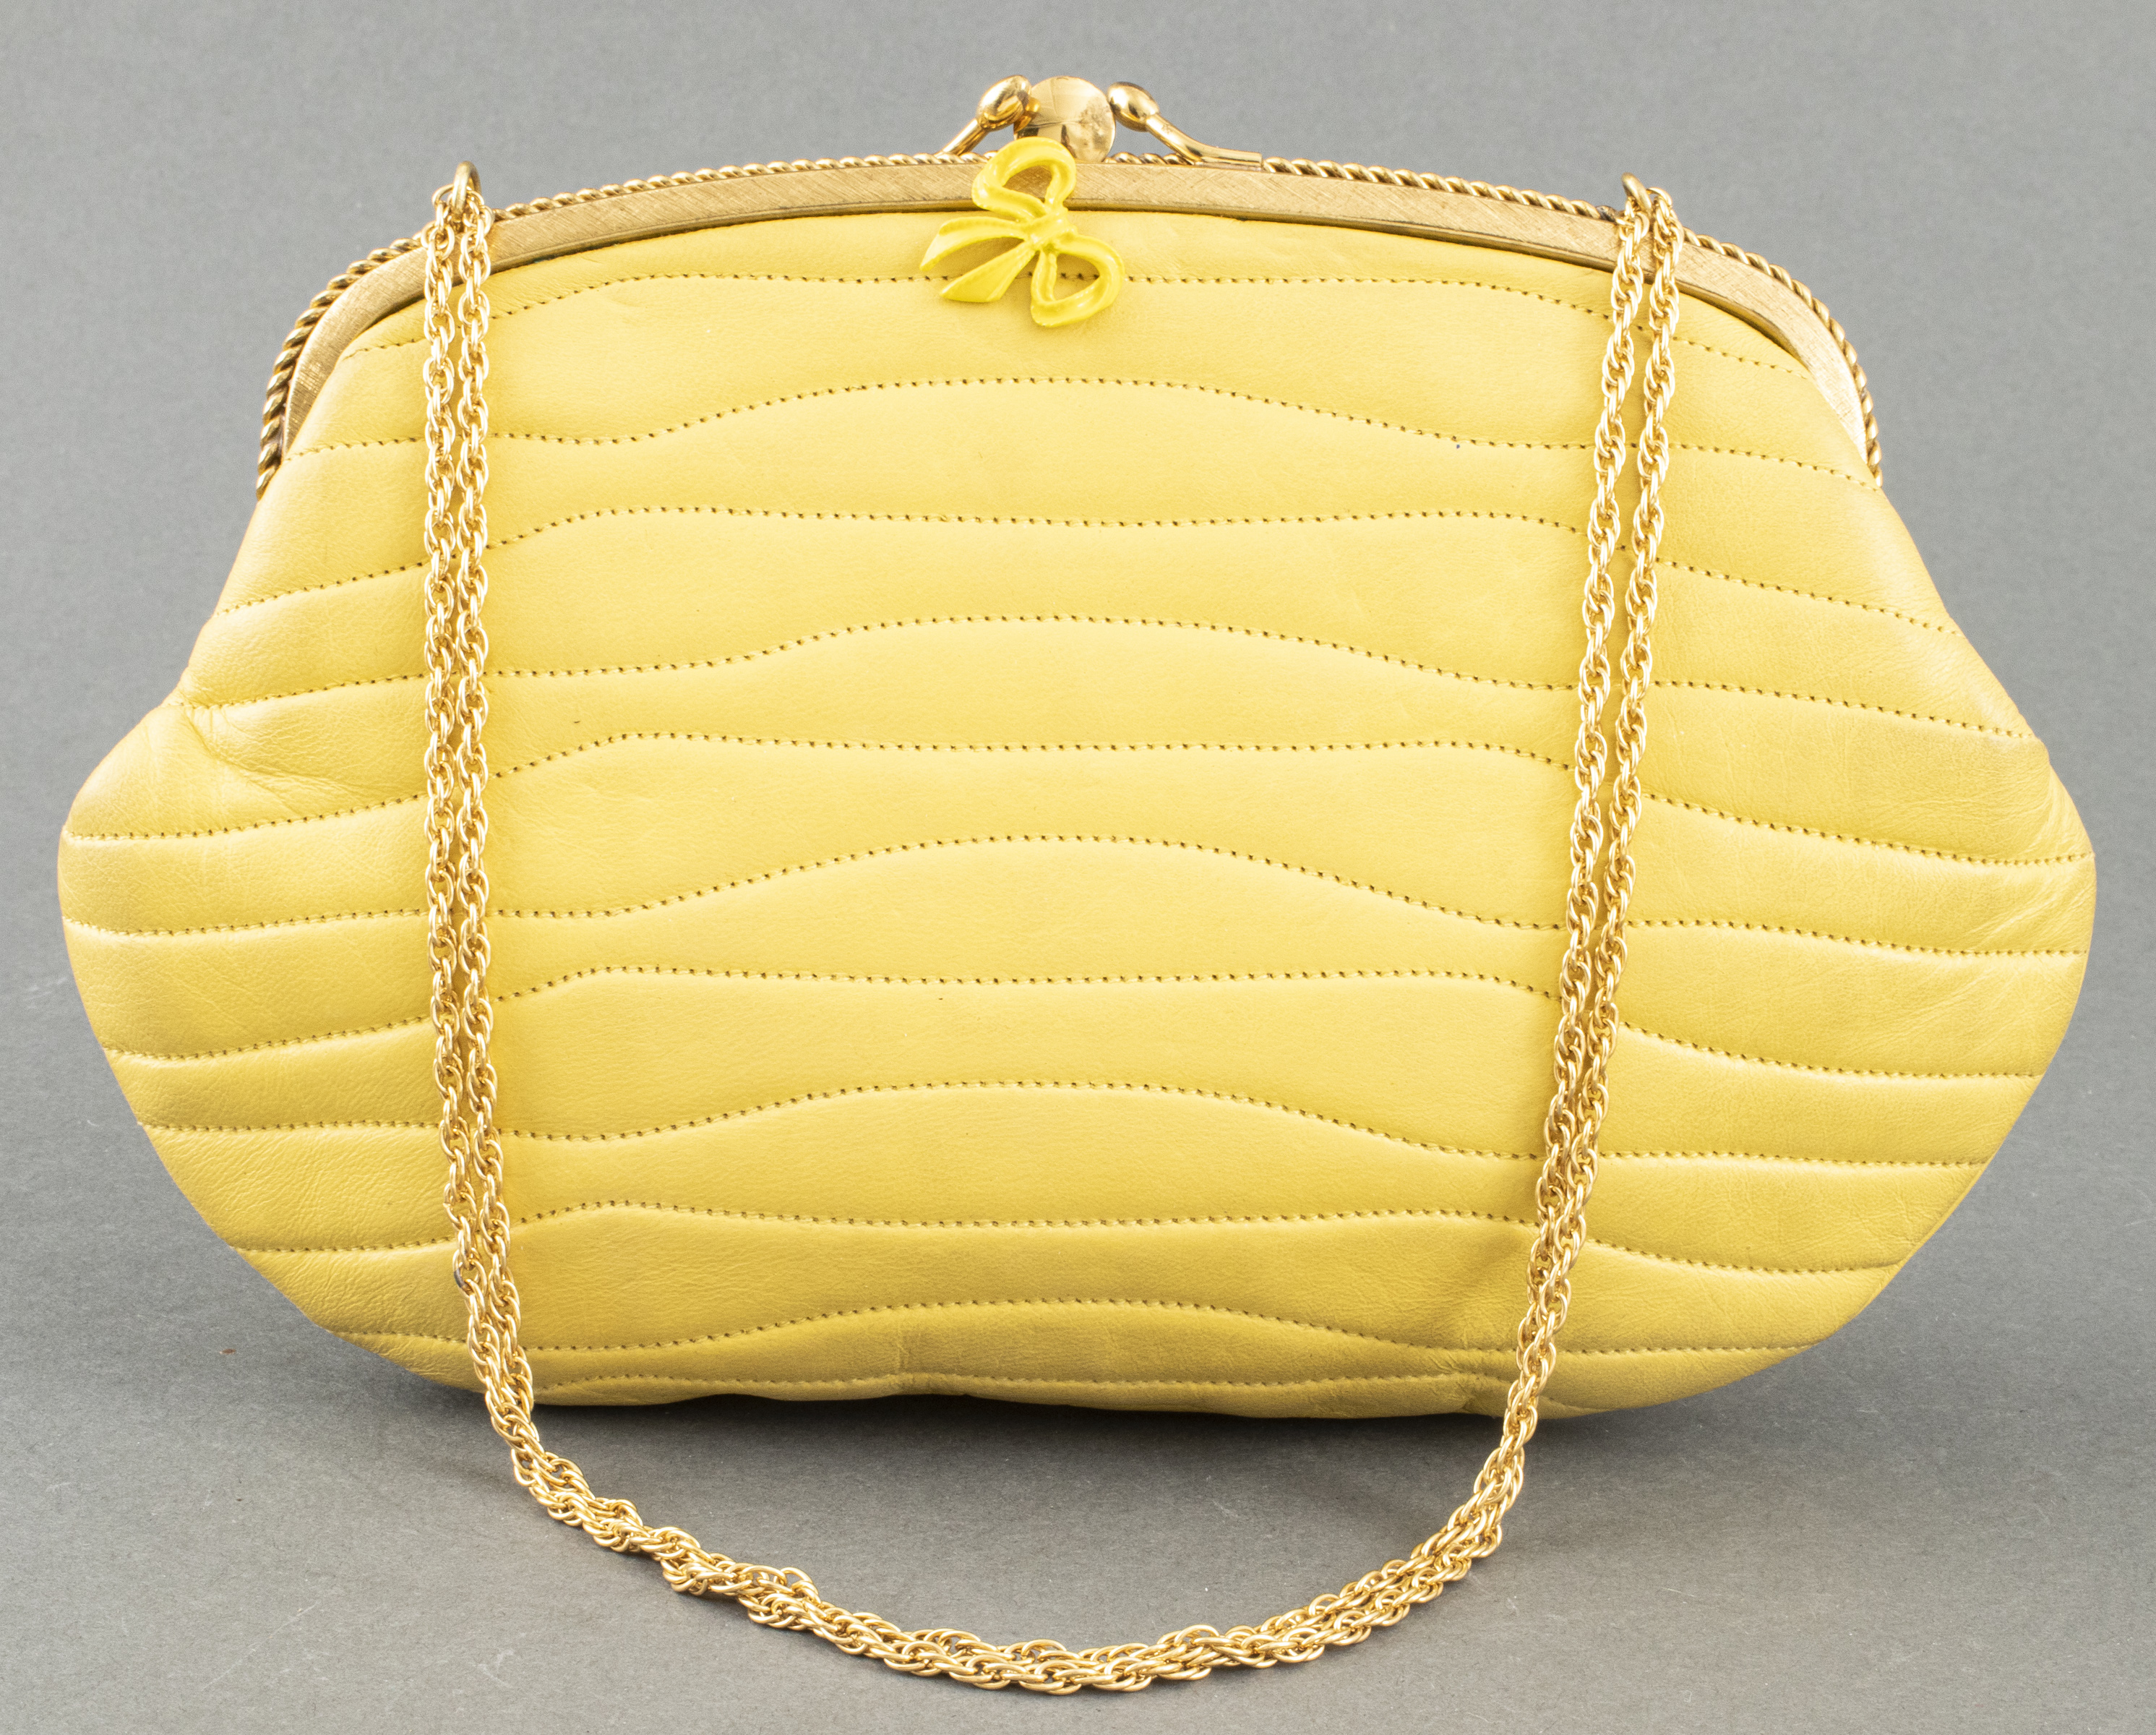 YELLOW QUILTED LEATHER HANDBAG 3c501b